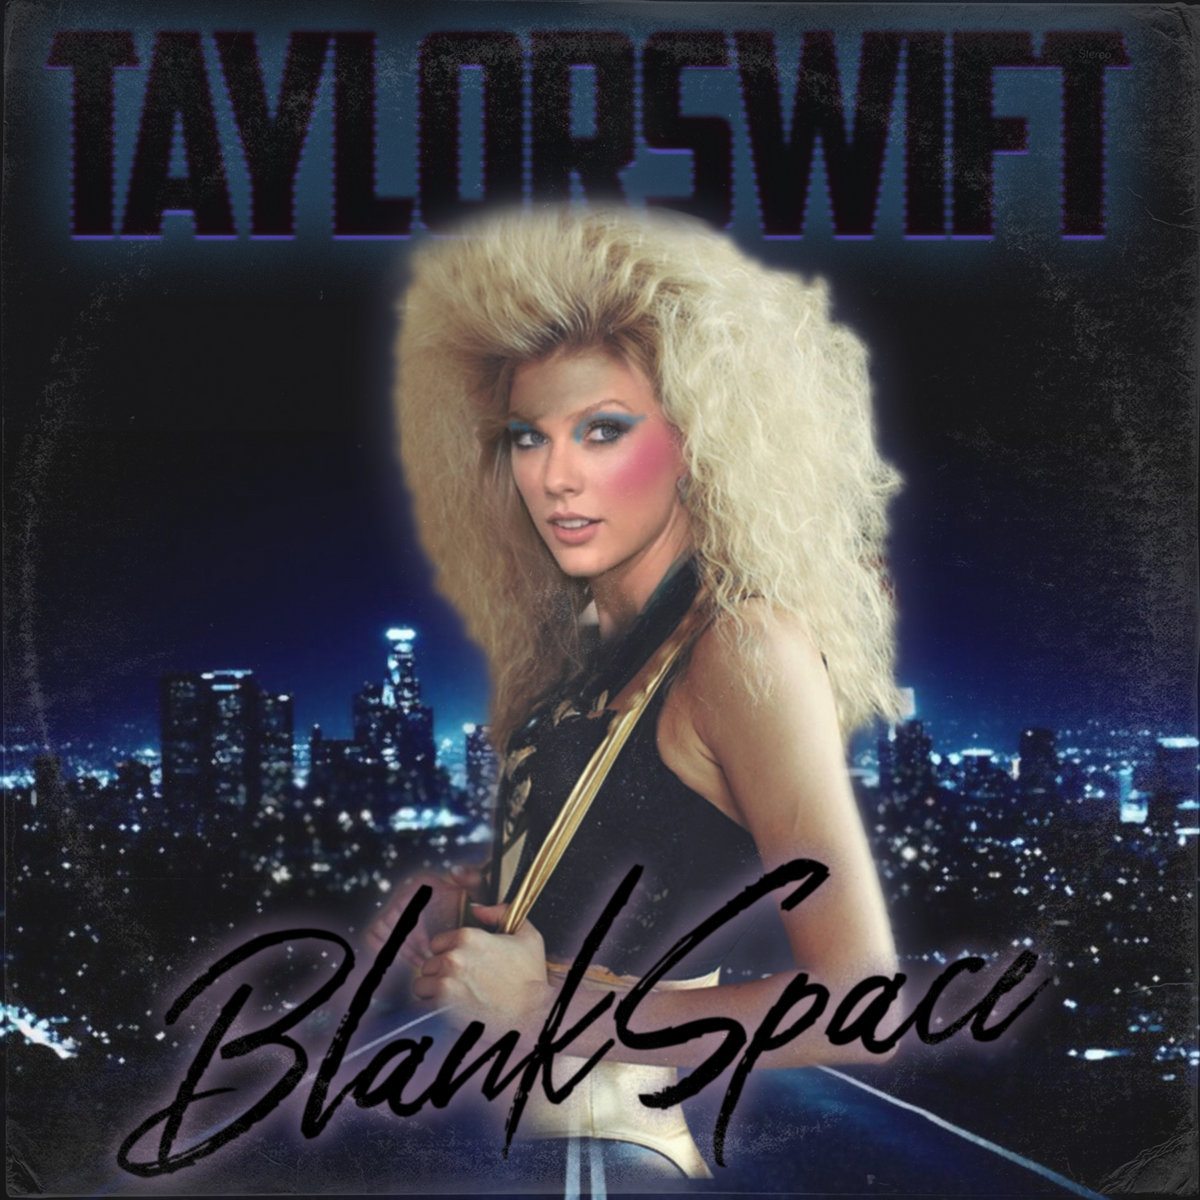 Taylor Swift - Blank Space ('89 Remix) | RoomBen